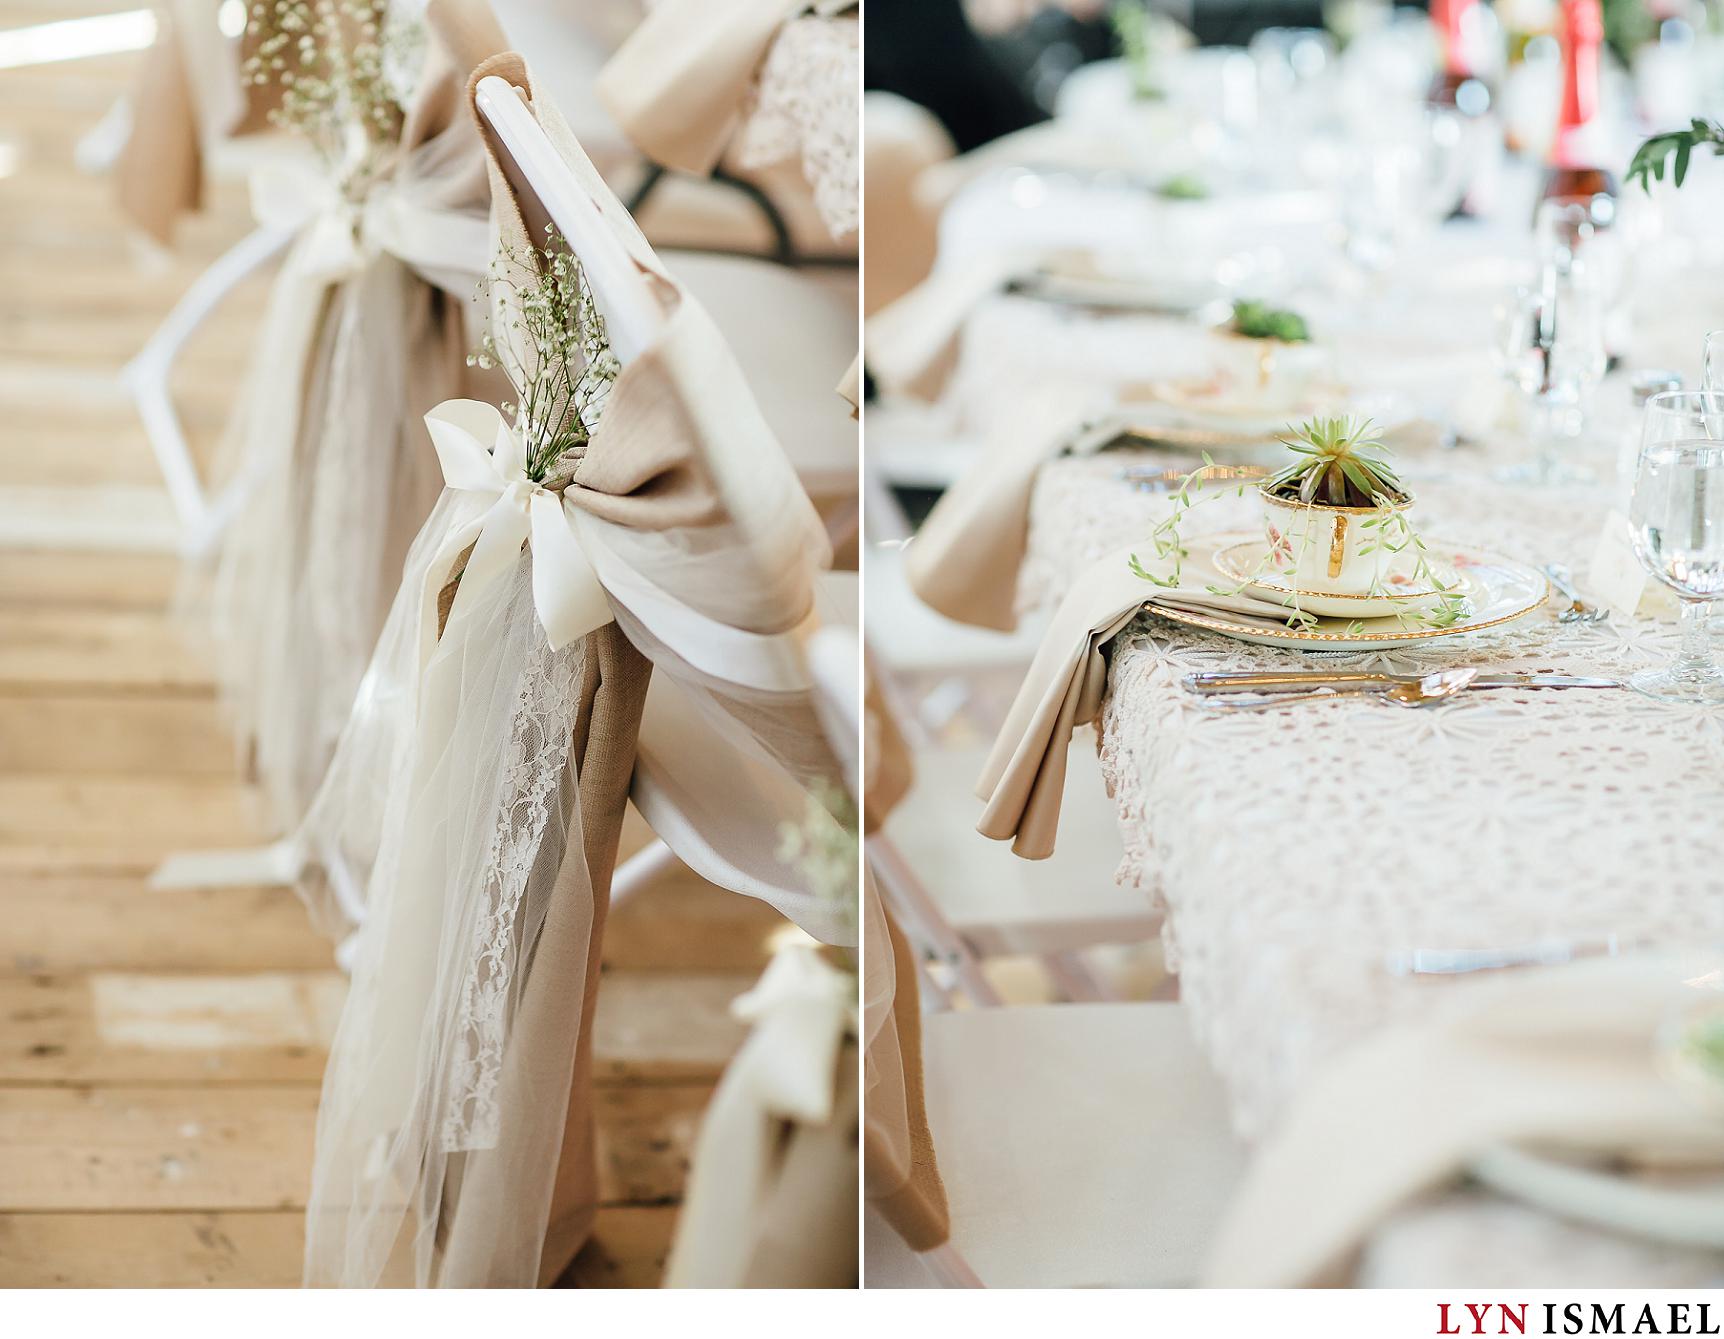 Beautifully decorated head table